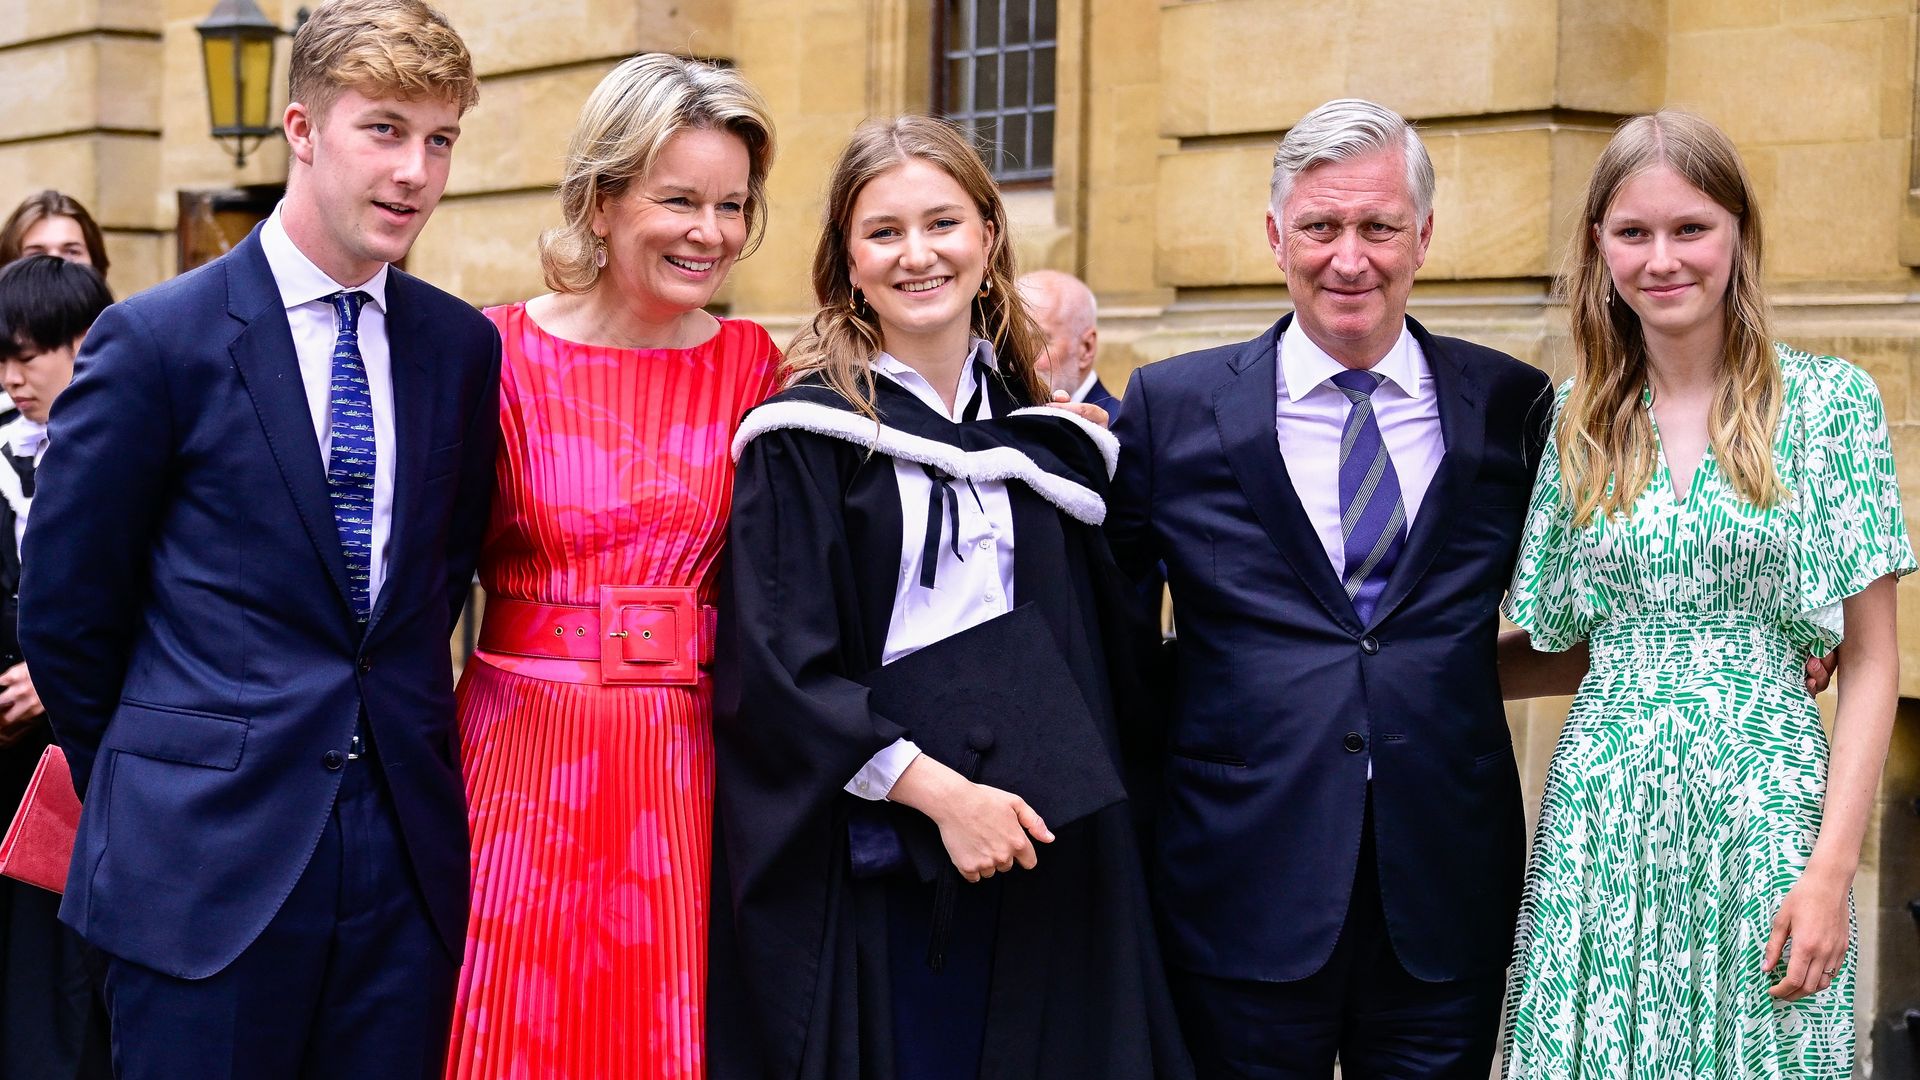 Prince Emmanuel, Queen Mathilde of Belgium, Crown Princess Elisabeth, King Philippe - Filip of Belgium and Princess Eleonore pictured at the graduation ceremony of the university of Oxford, at the Sheldonian Theatre in Oxford, United Kingdom, Tuesday 23 July 2024. The Crown Princess officially completed her three-year undergraduate degree in History and Politics at Lincoln College of the University of Oxford. BELGA PHOTO LAURIE DIEFFEMBACQ (Photo by LAURIE DIEFFEMBACQ / BELGA MAG / Belga via AFP) (Photo by LAURIE DIEFFEMBACQ/BELGA MAG/AFP via Getty Images)